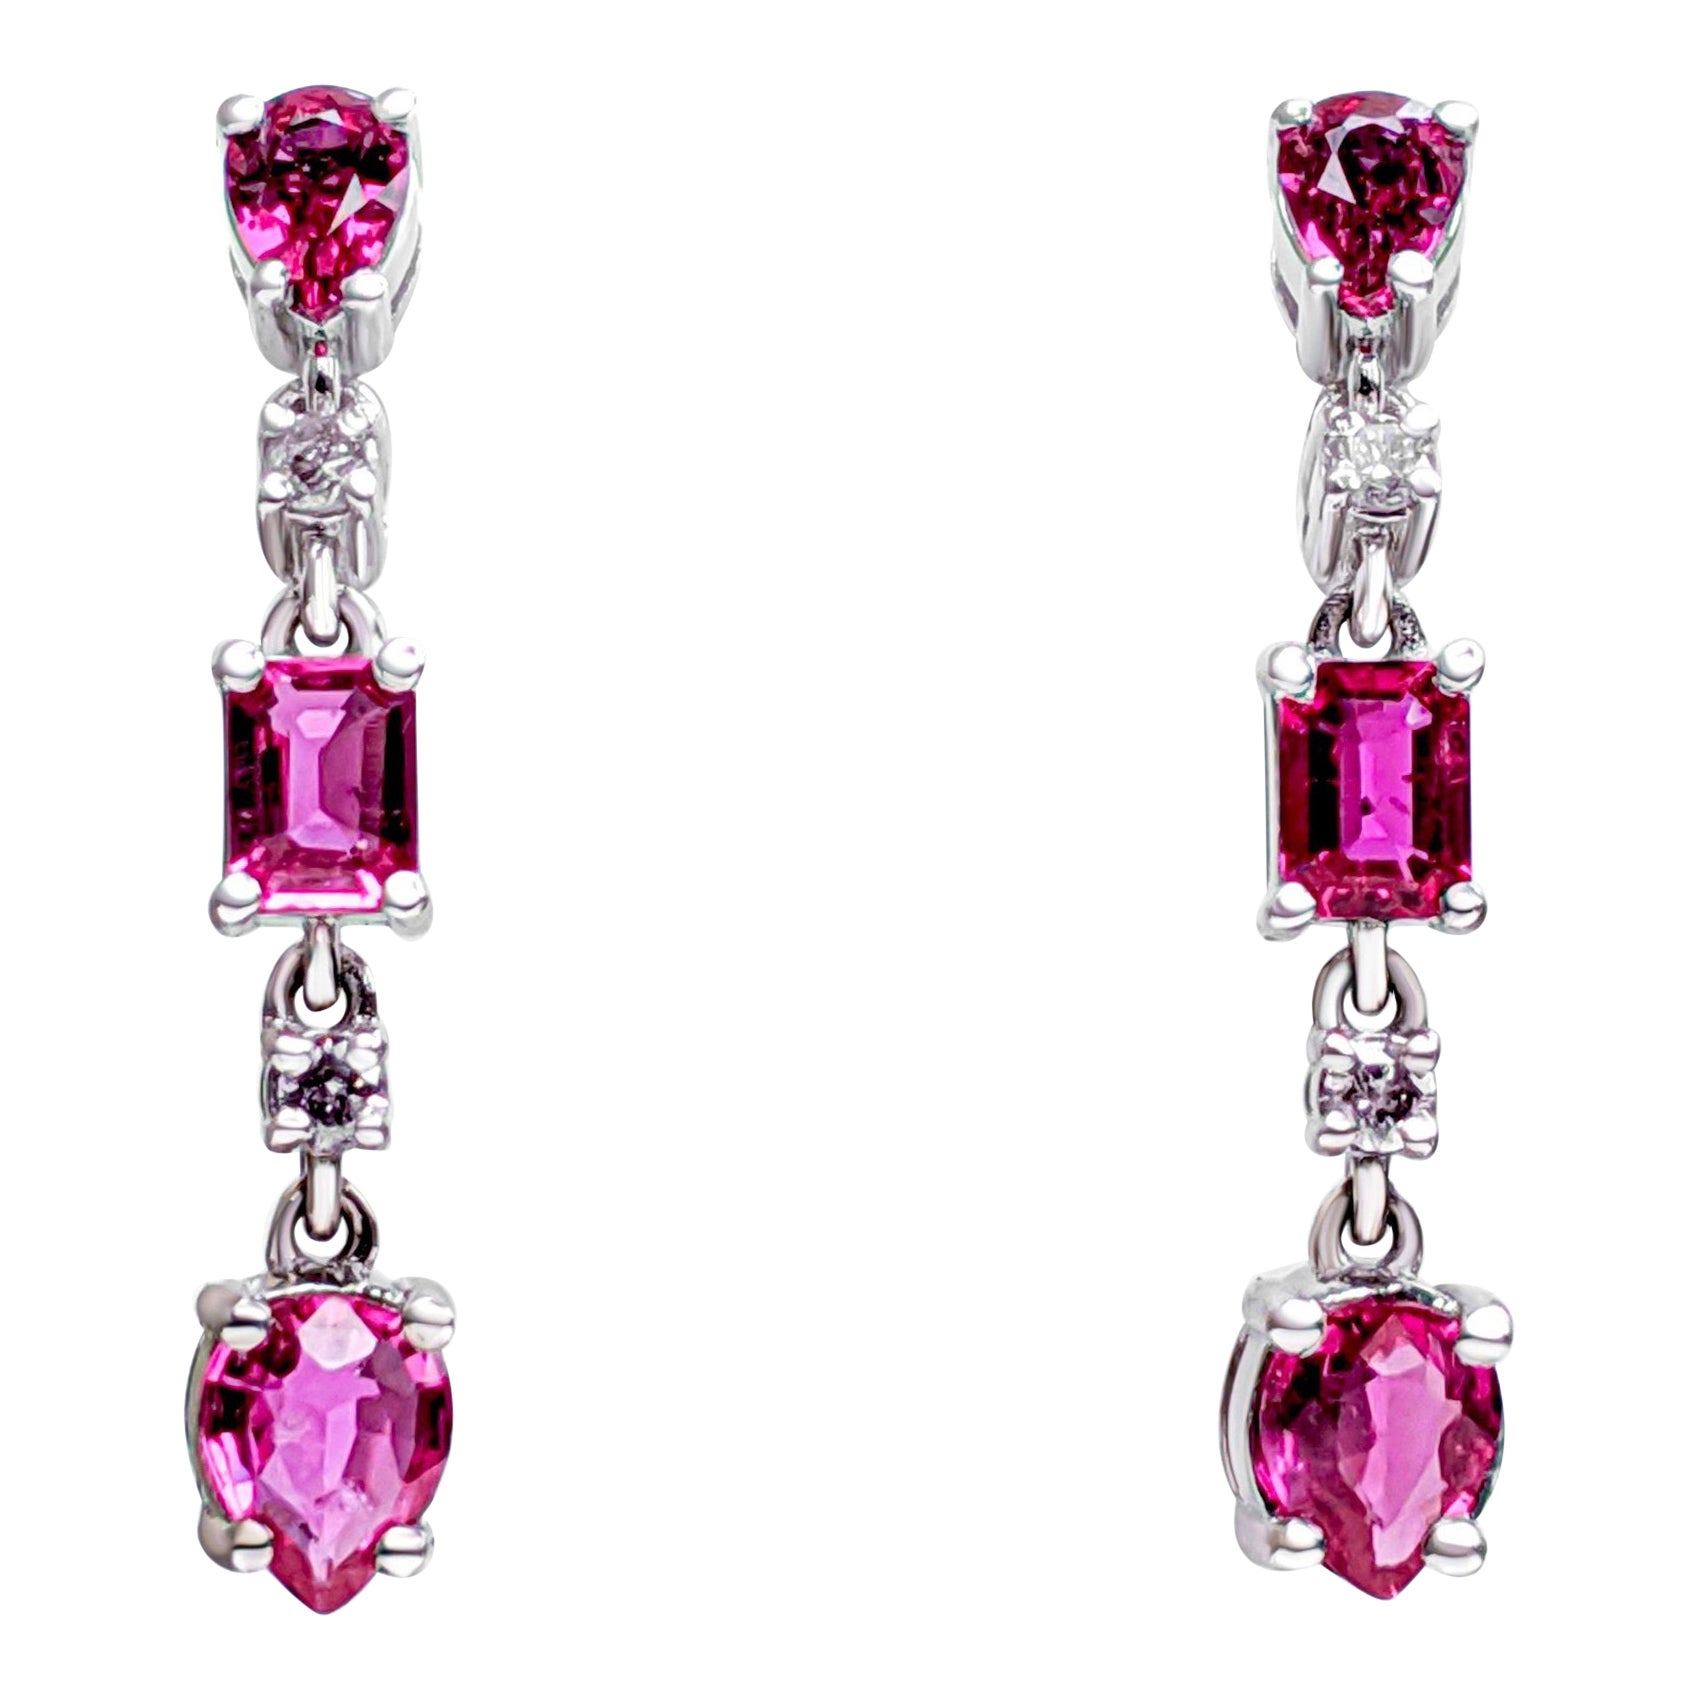 NO RESERVE! 1.23cttw NO HEAT Ruby & 0.08Ct Diamonds 14K White Gold Earrings For Sale